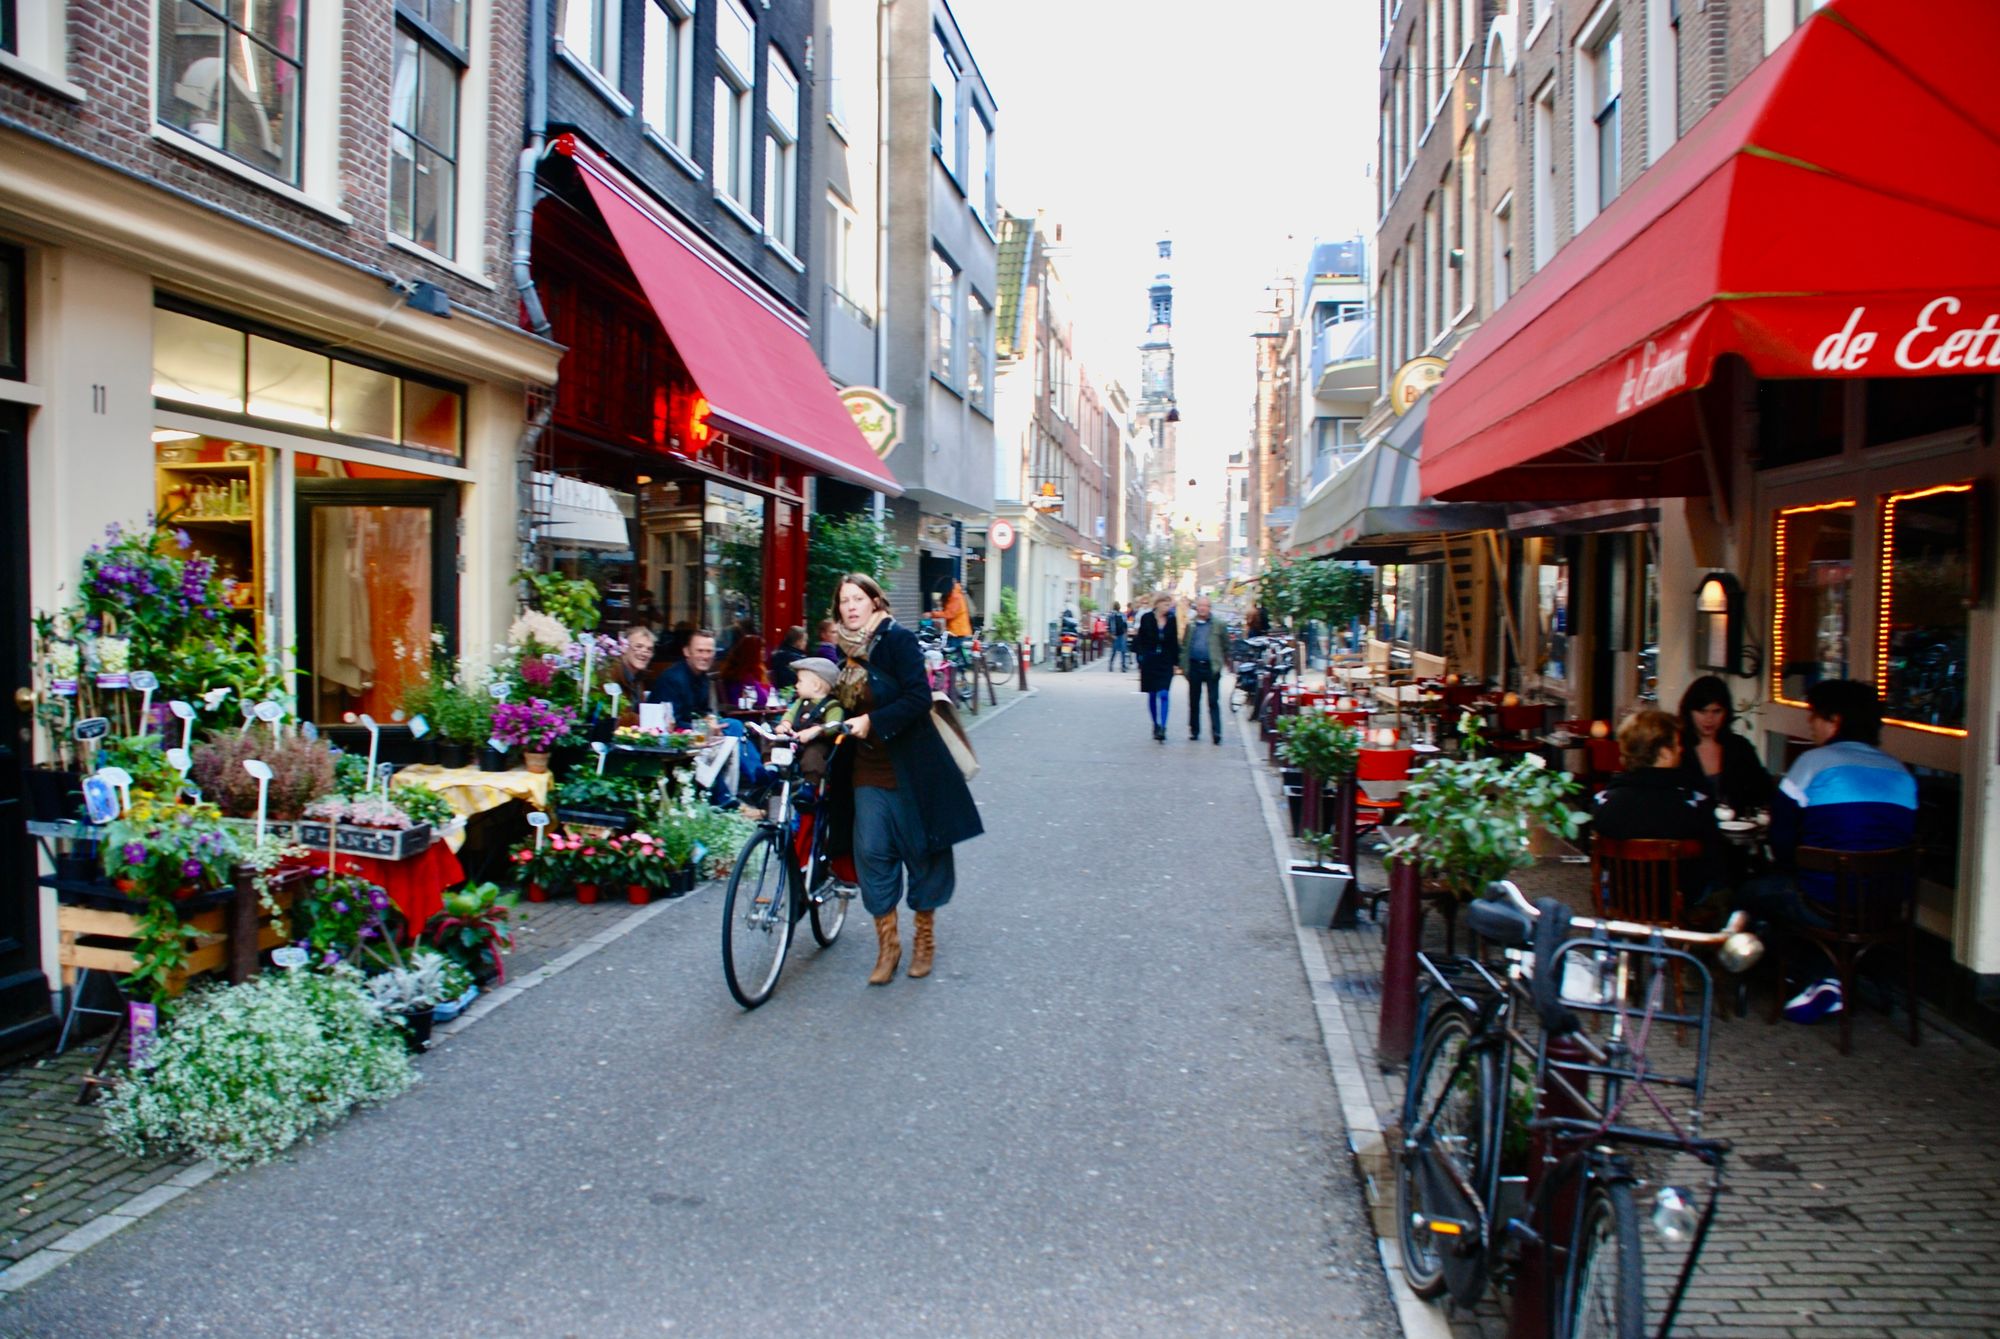 What If We Planned Streets To Maximize Life?